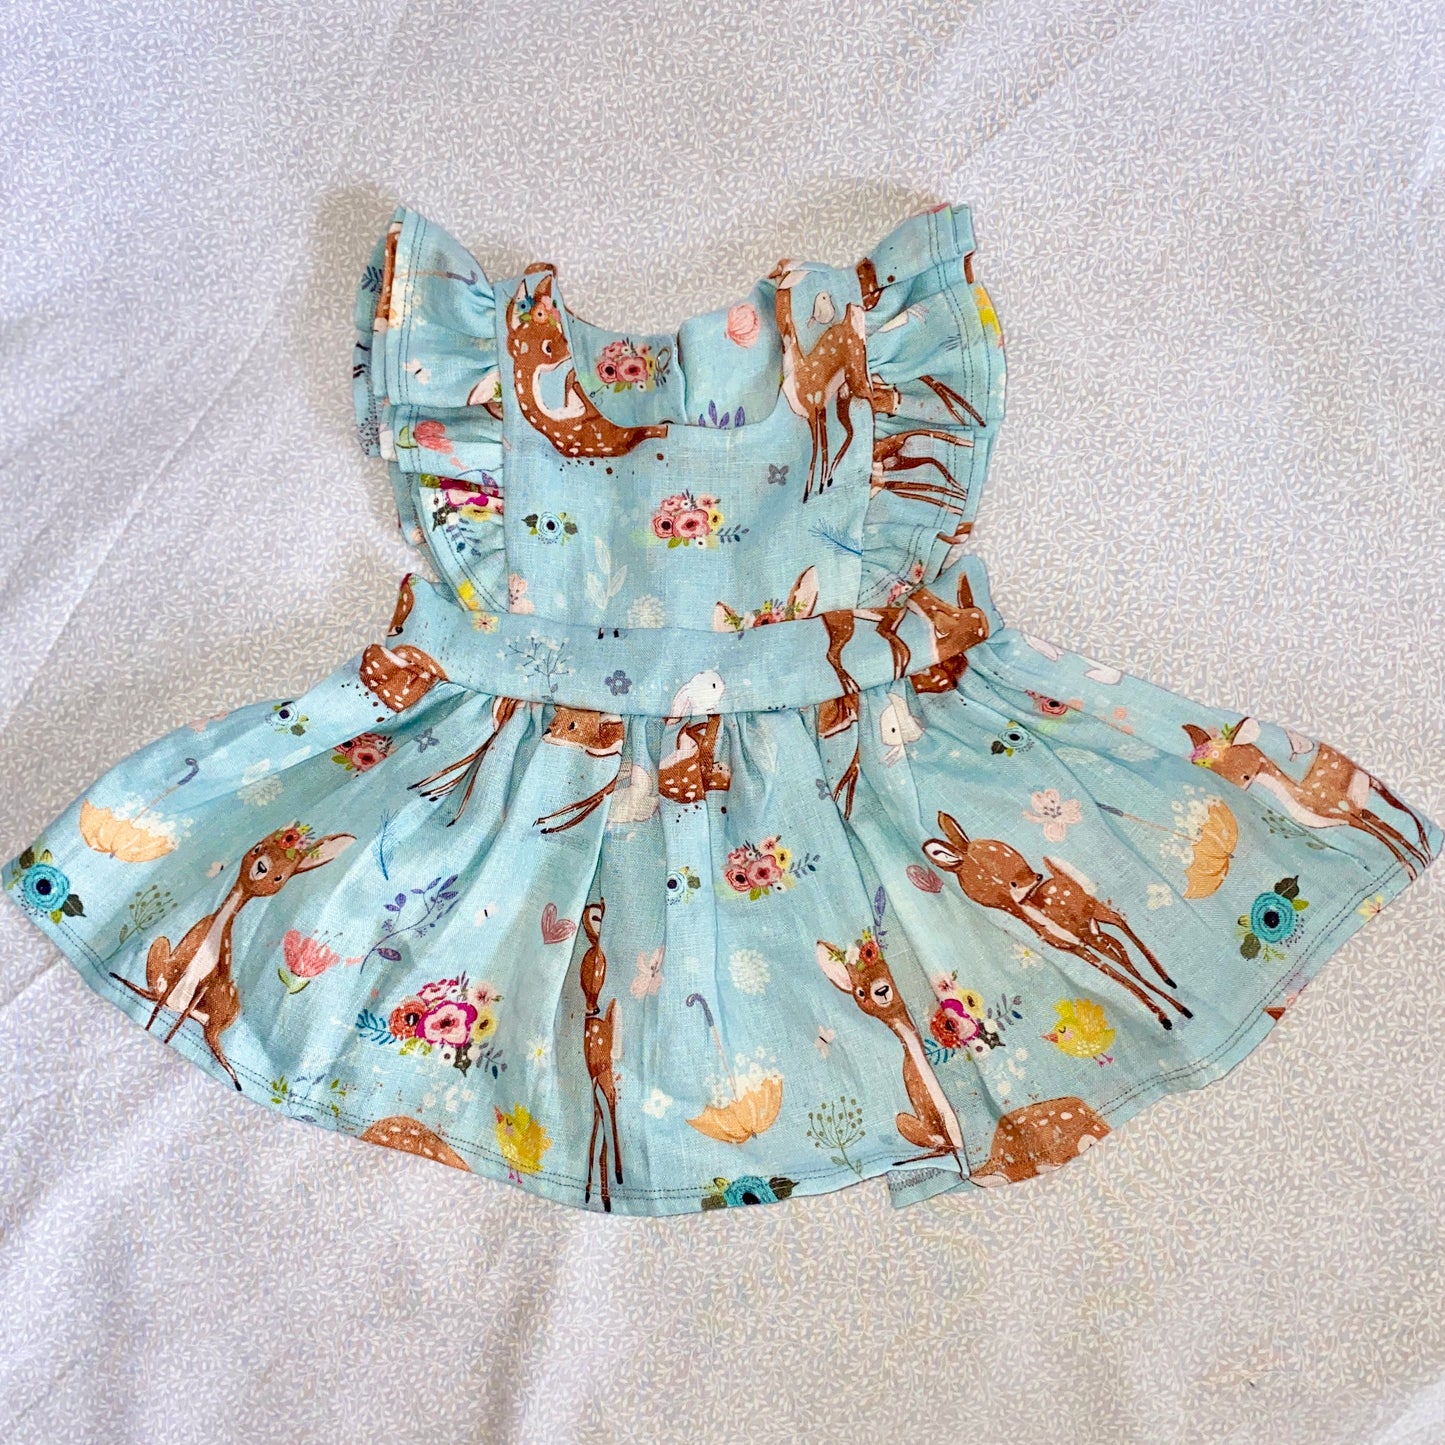 Blue Pinafore baby dress with deer and bunnies